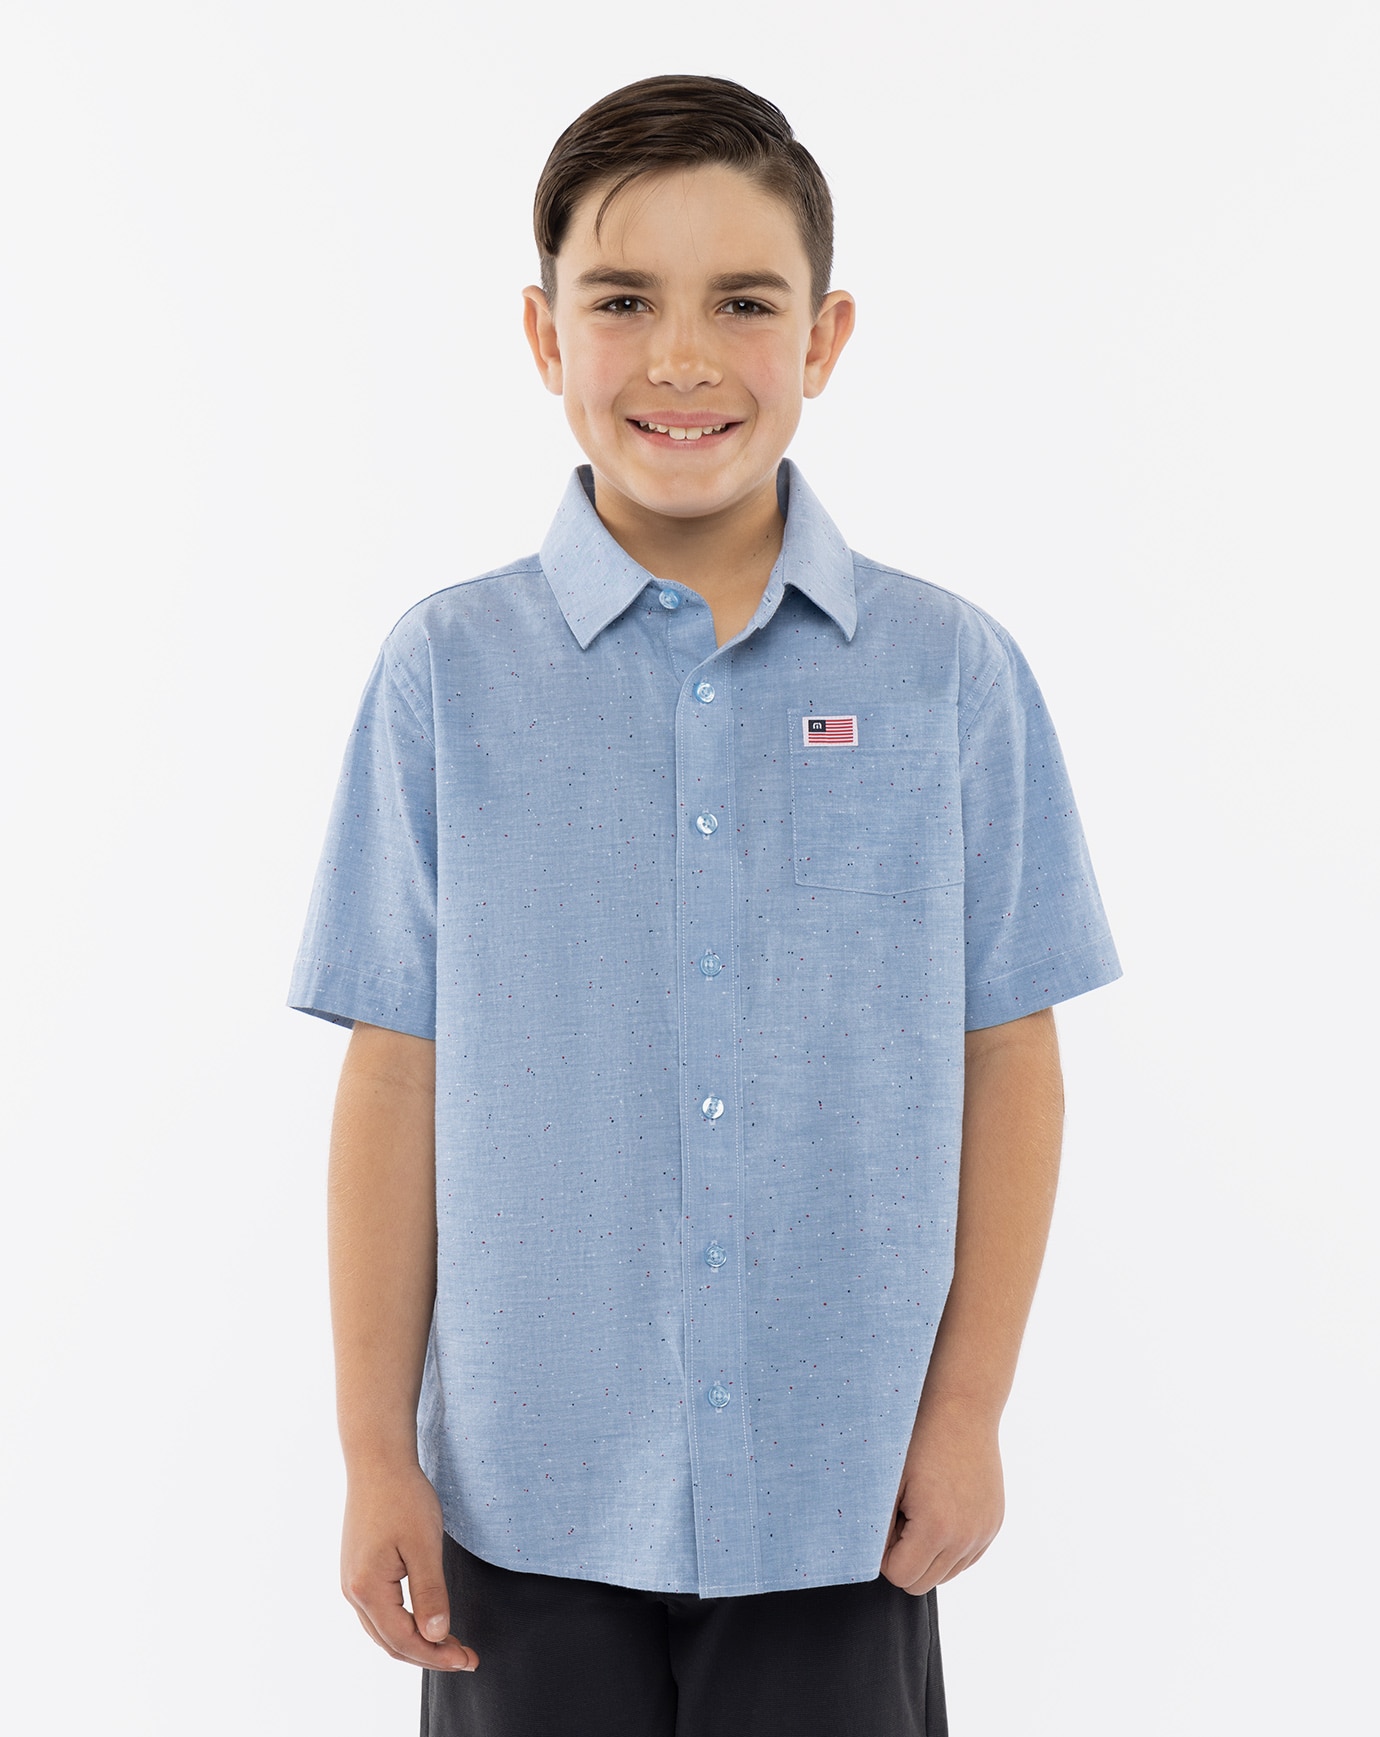 EAGLE PRIDE YOUTH BUTTON-UP 1